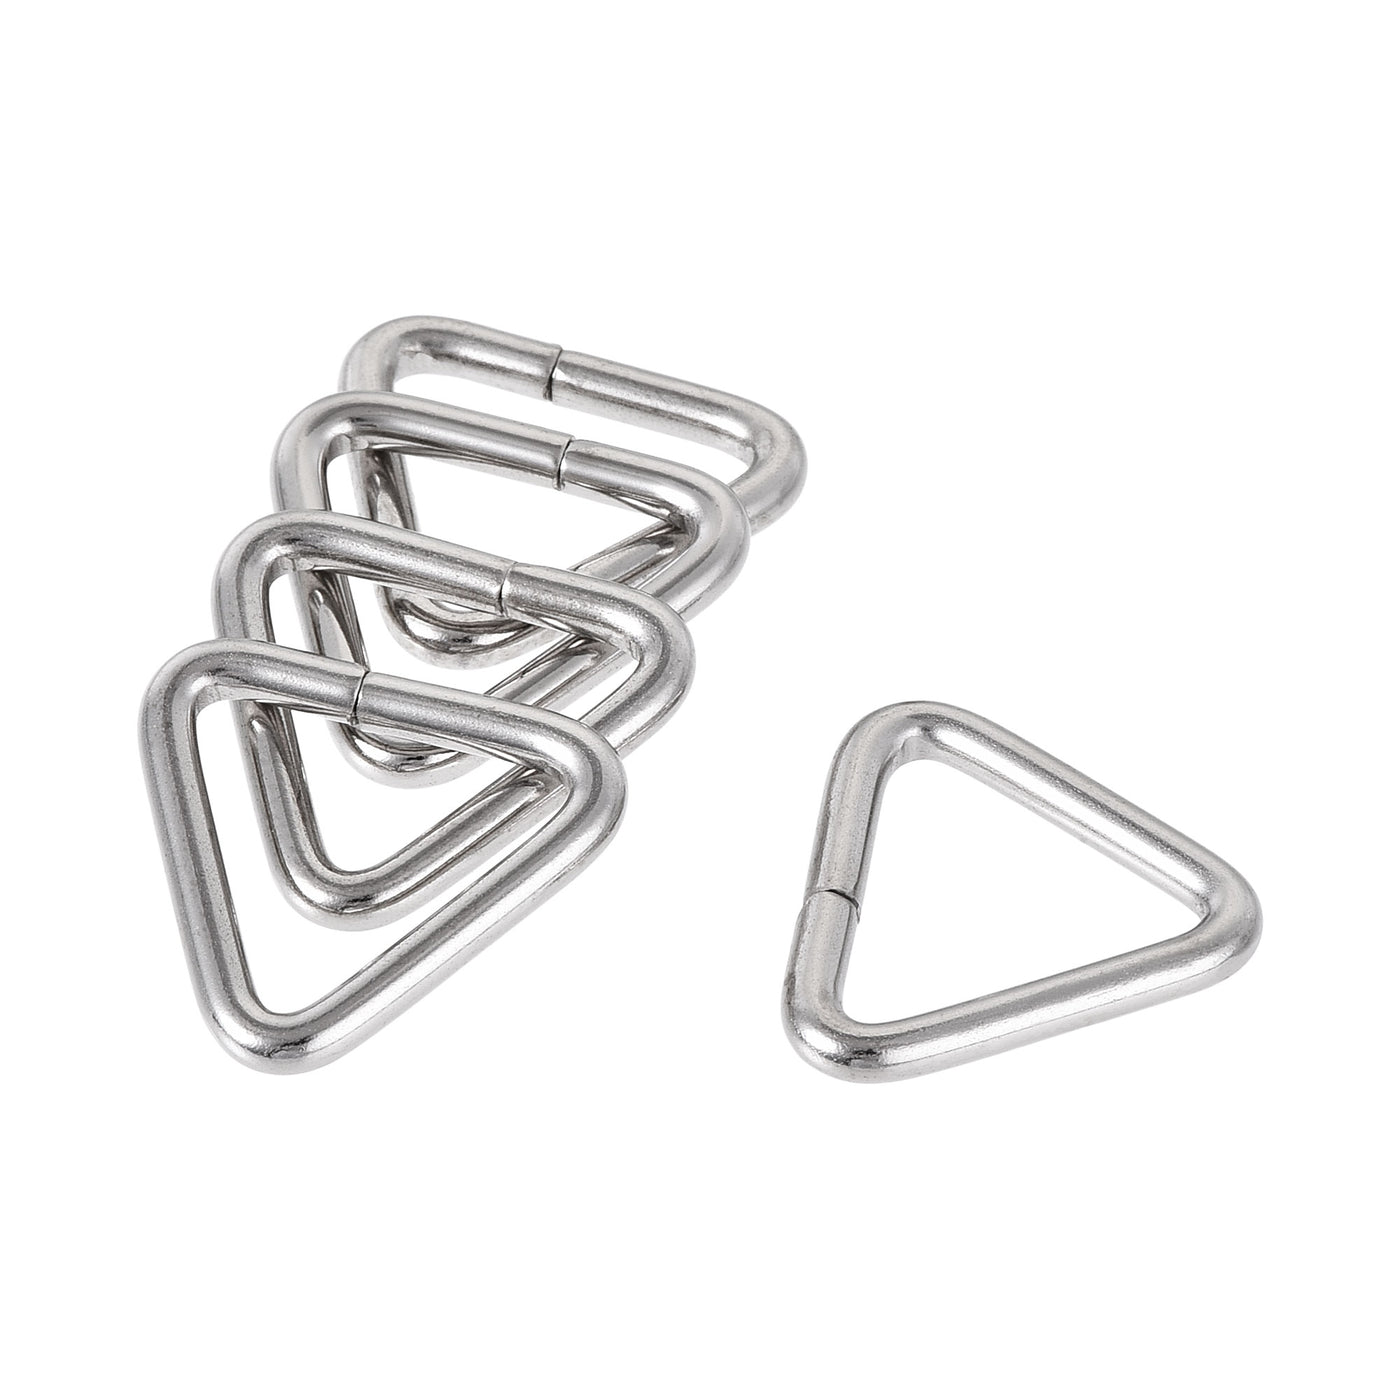 uxcell Uxcell Metal Triangle Ring Buckle 0.63"(16mm) Inner Width for Strap Craft DIY 10pcs